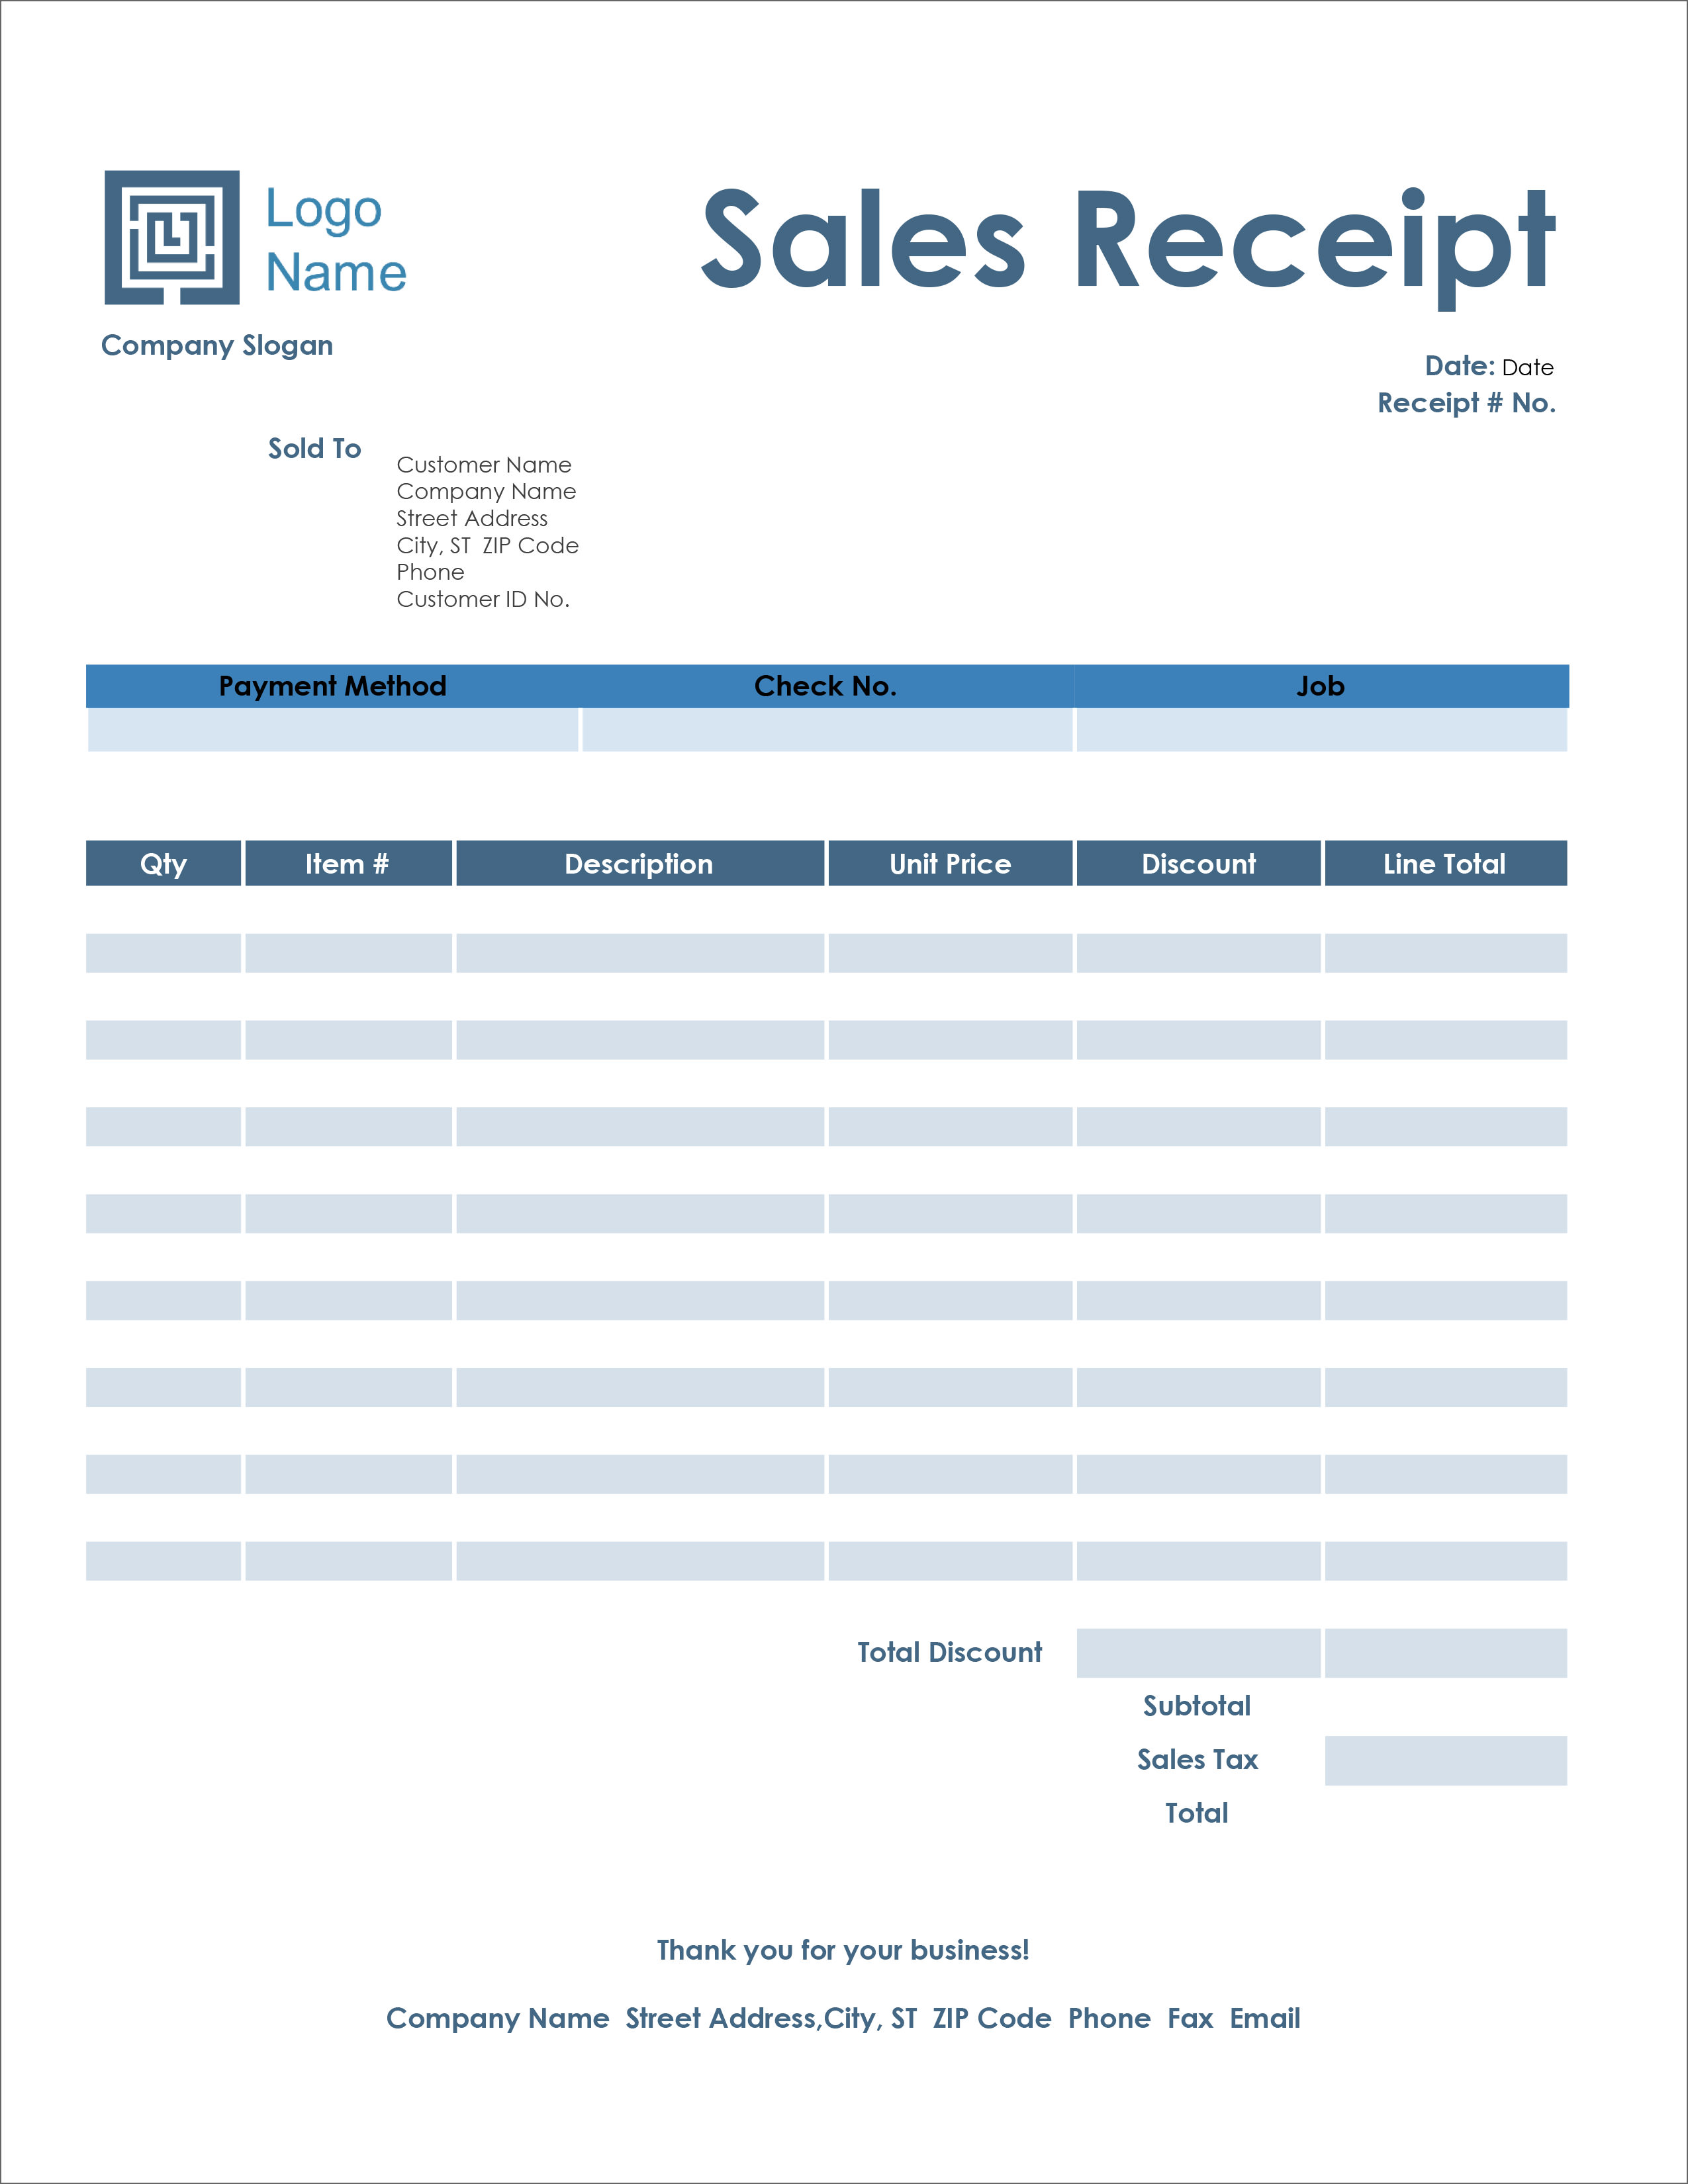 23 Free Receipt Templates - Download For Microsoft Word, Excel Intended For Microsoft Invoices Templates Free